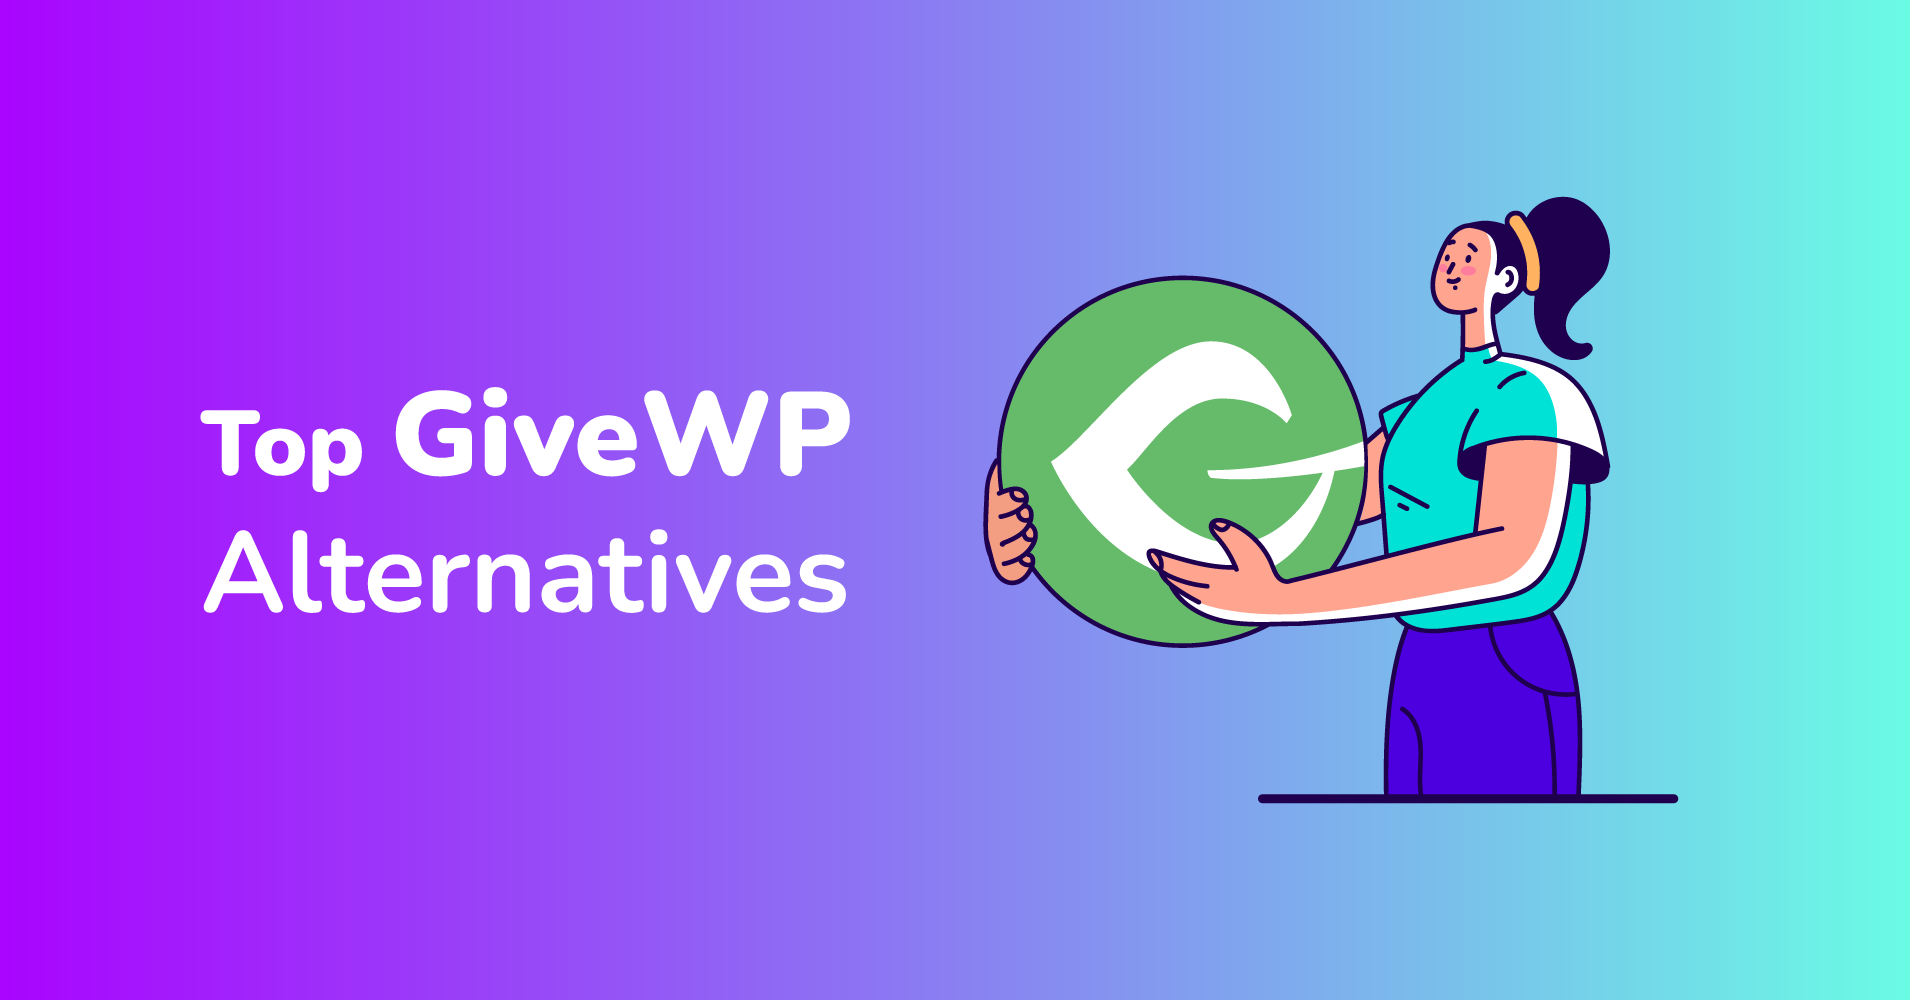 Top 6 GiveWP Alternatives & Competitors in 2022